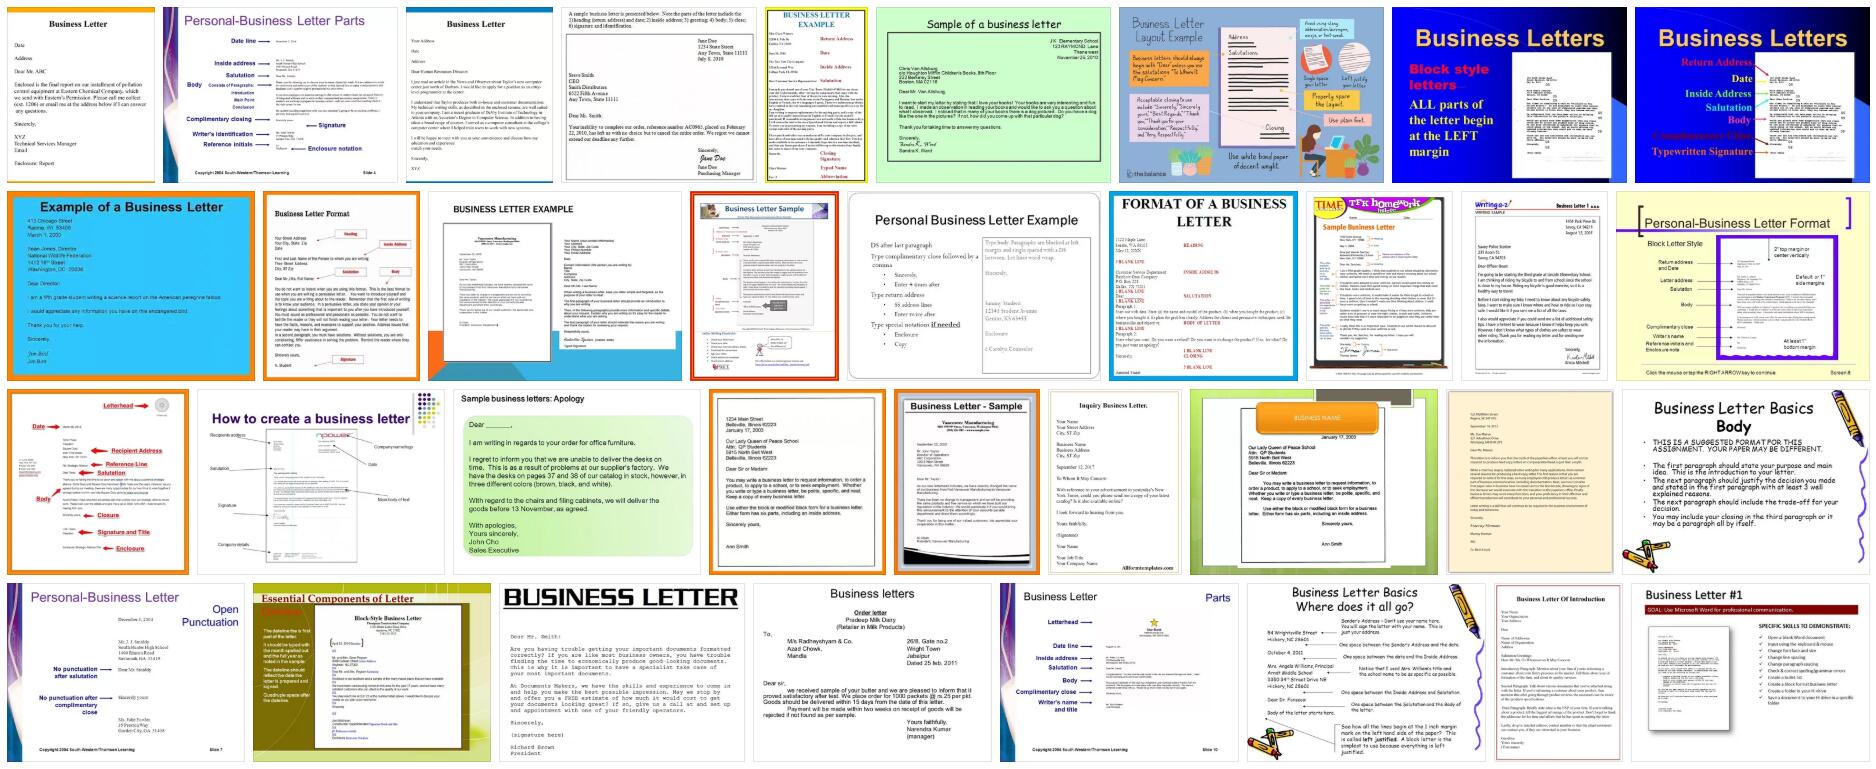 What is a business letter